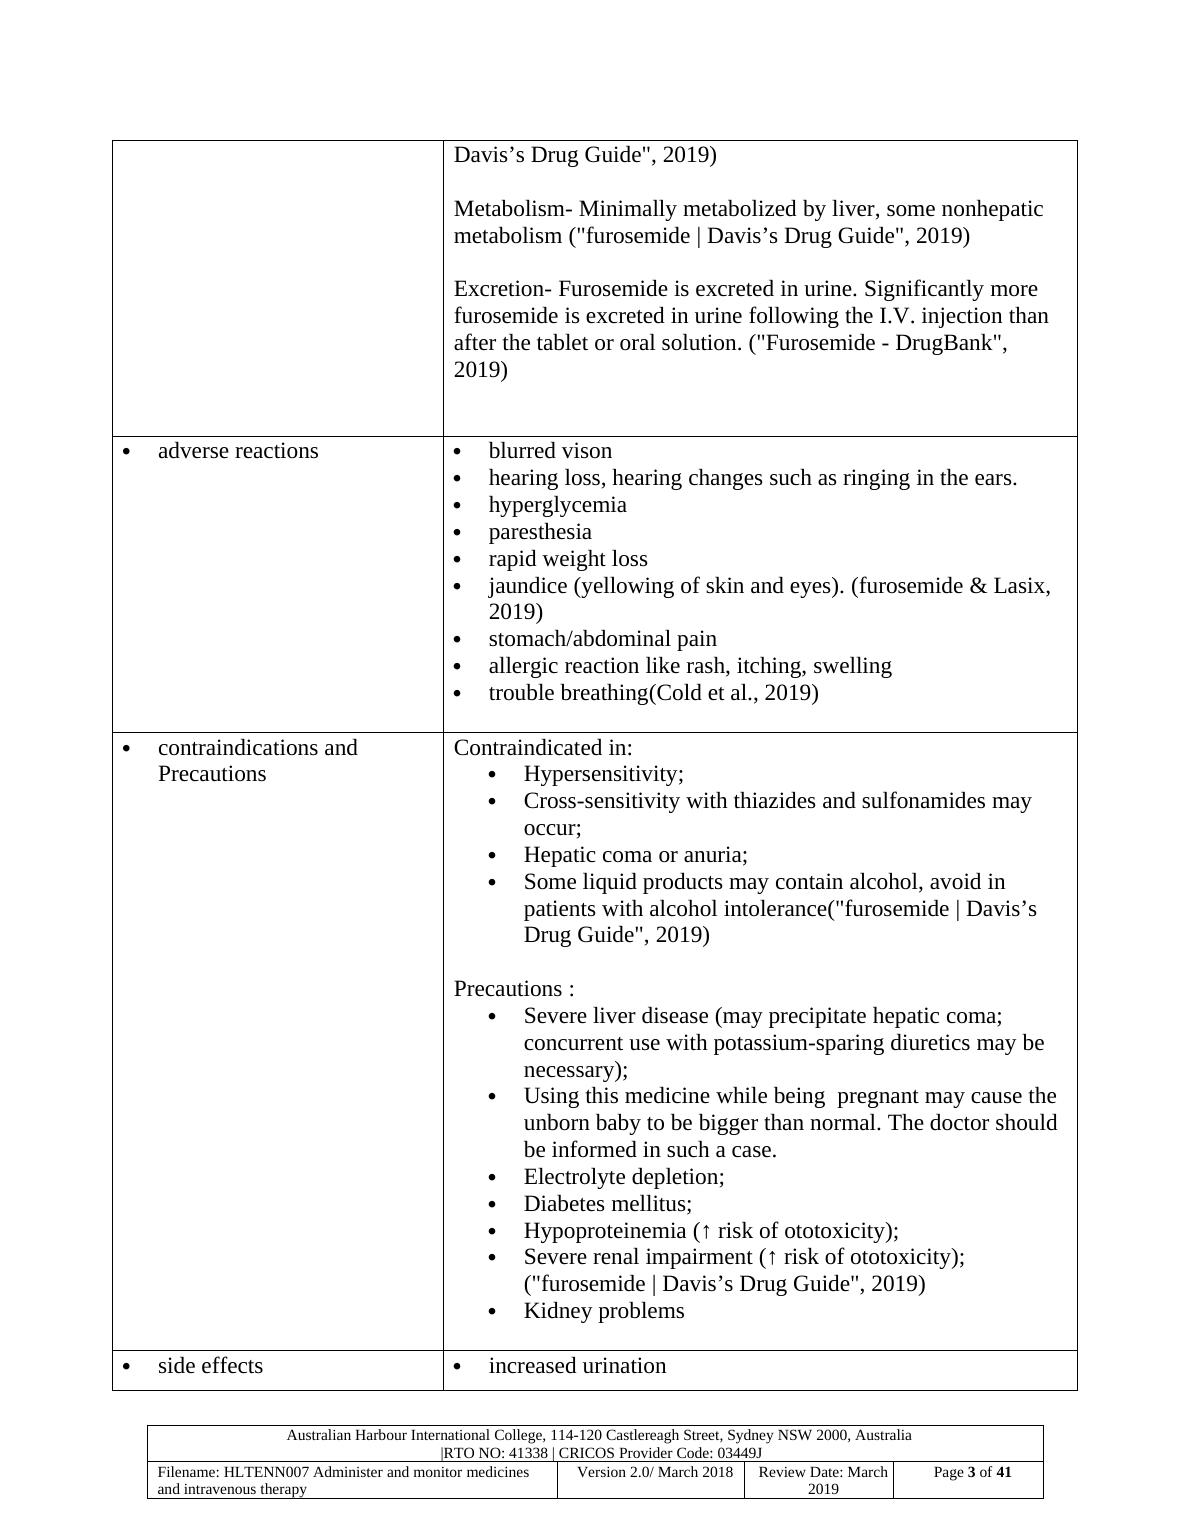 Research Work/Project Work - Medication Summary_3